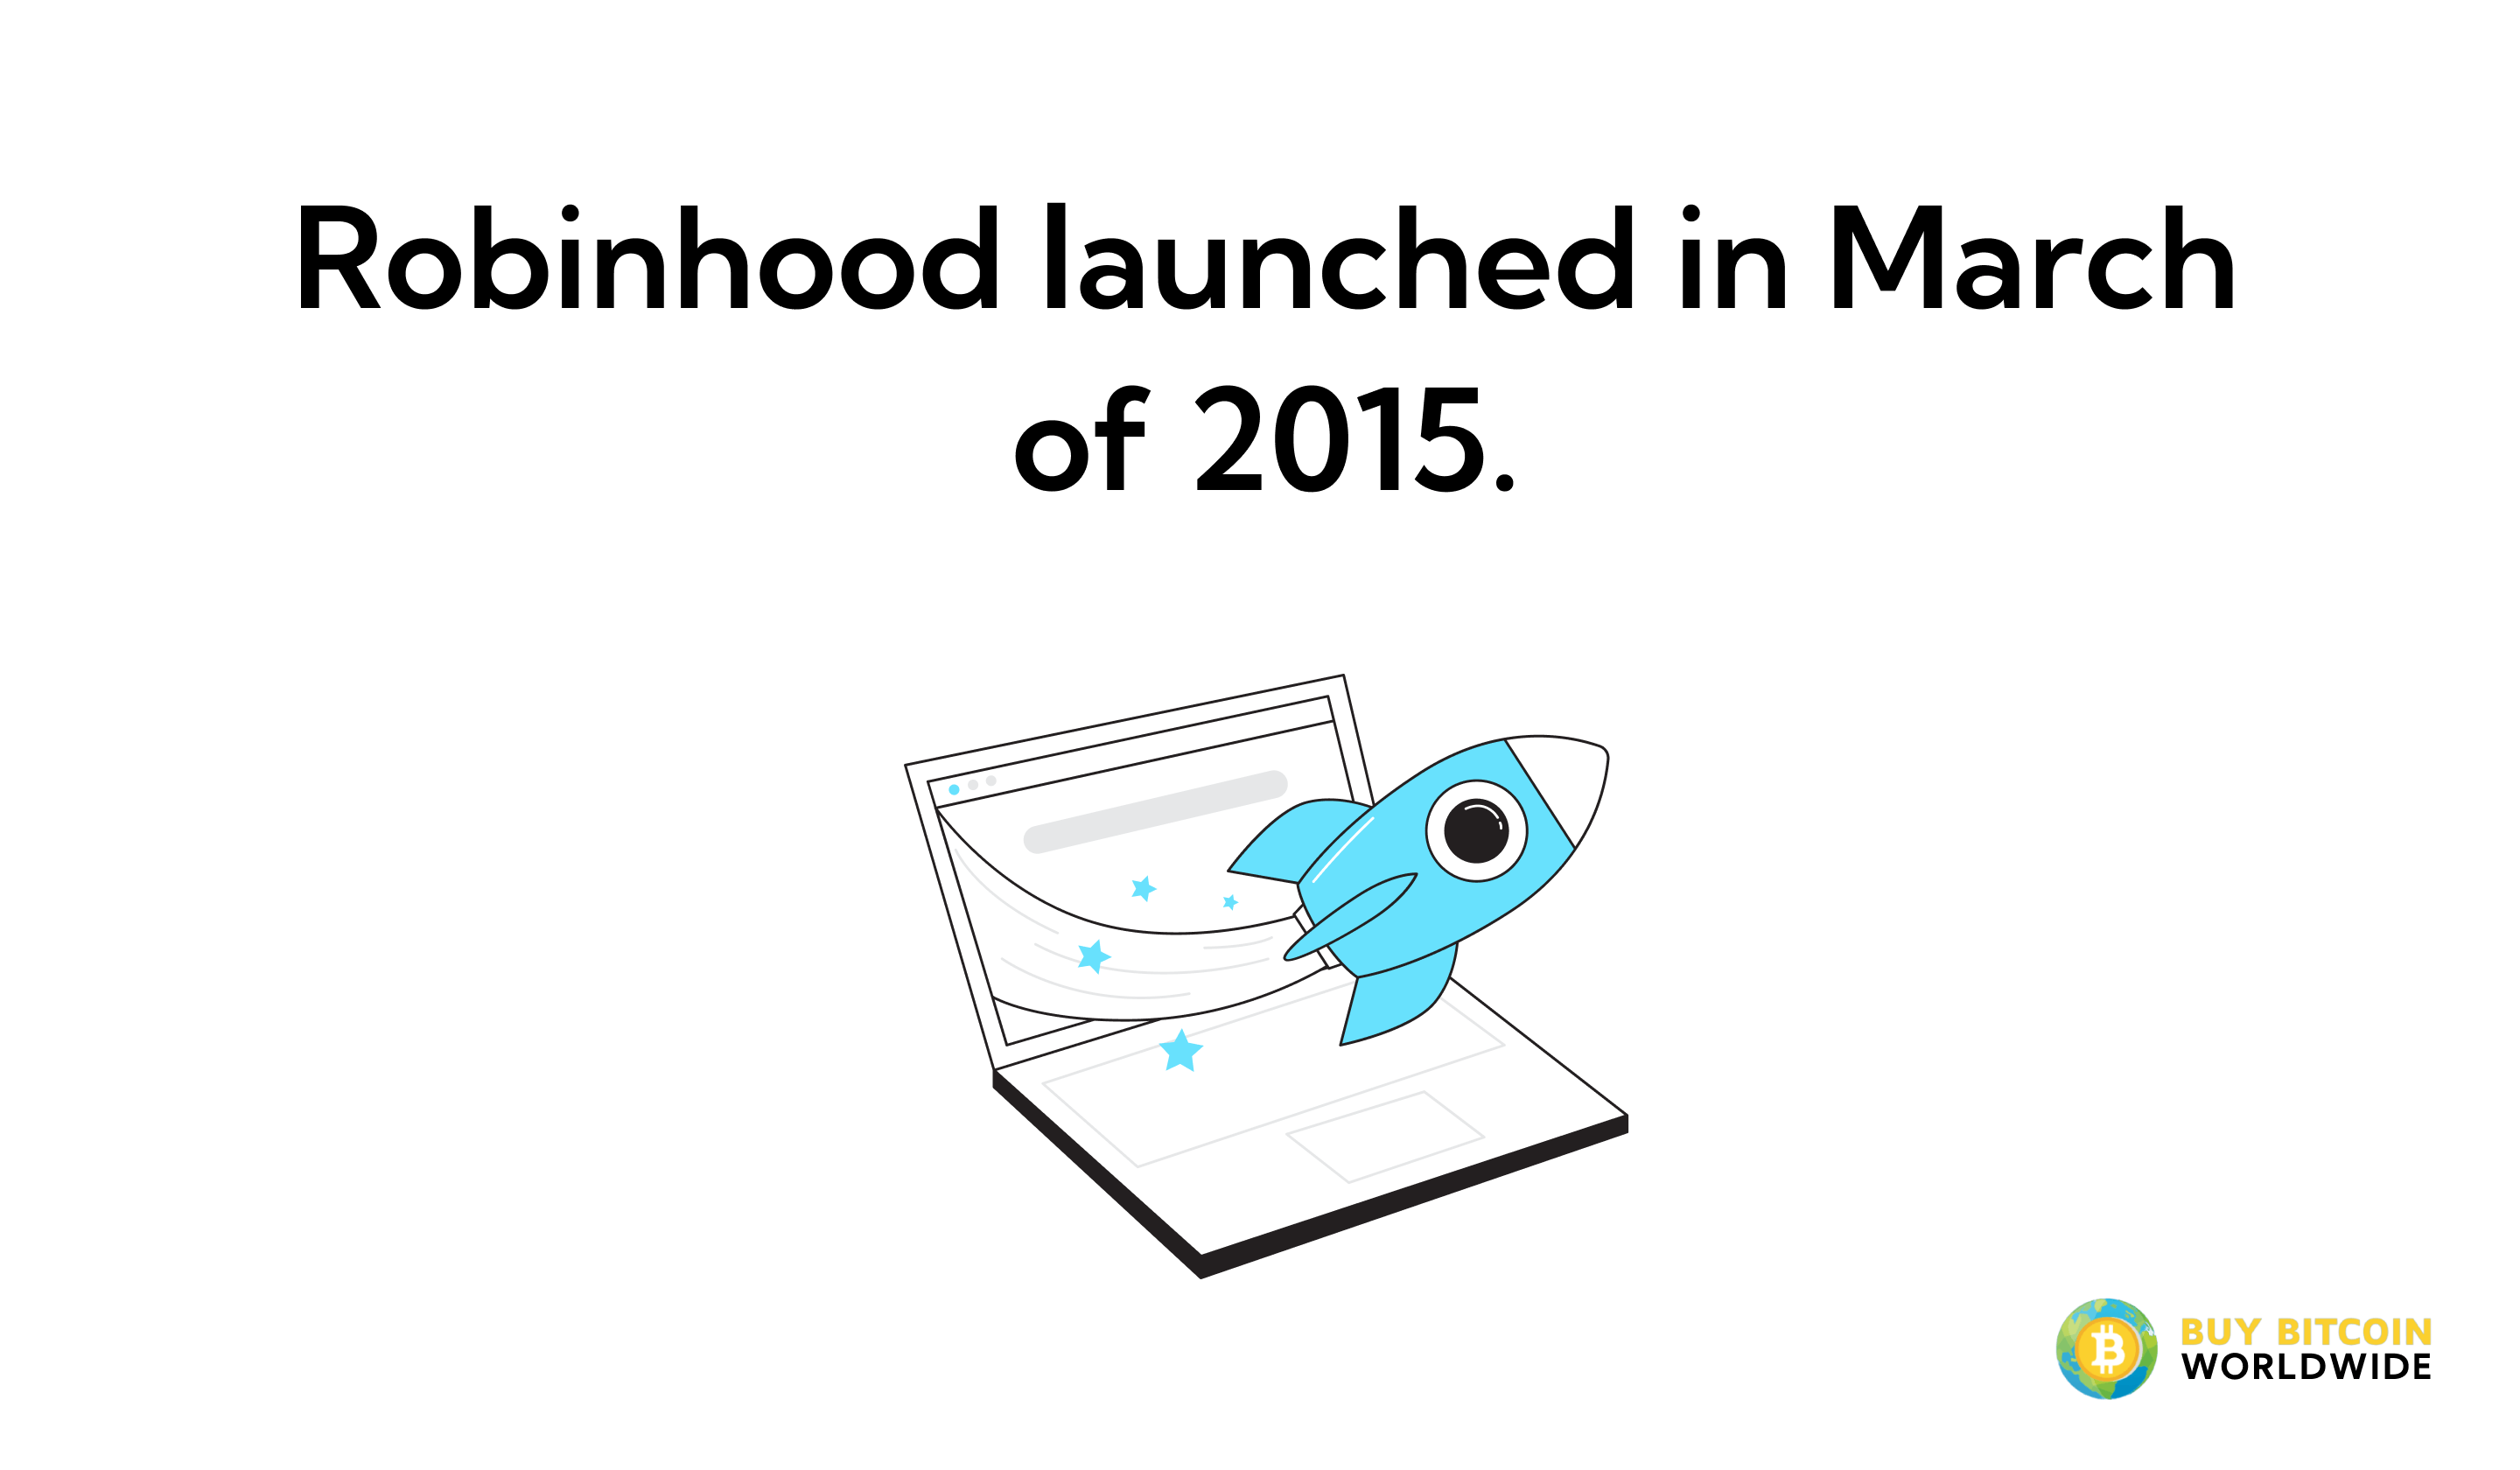 robinhood launched in march of 2015